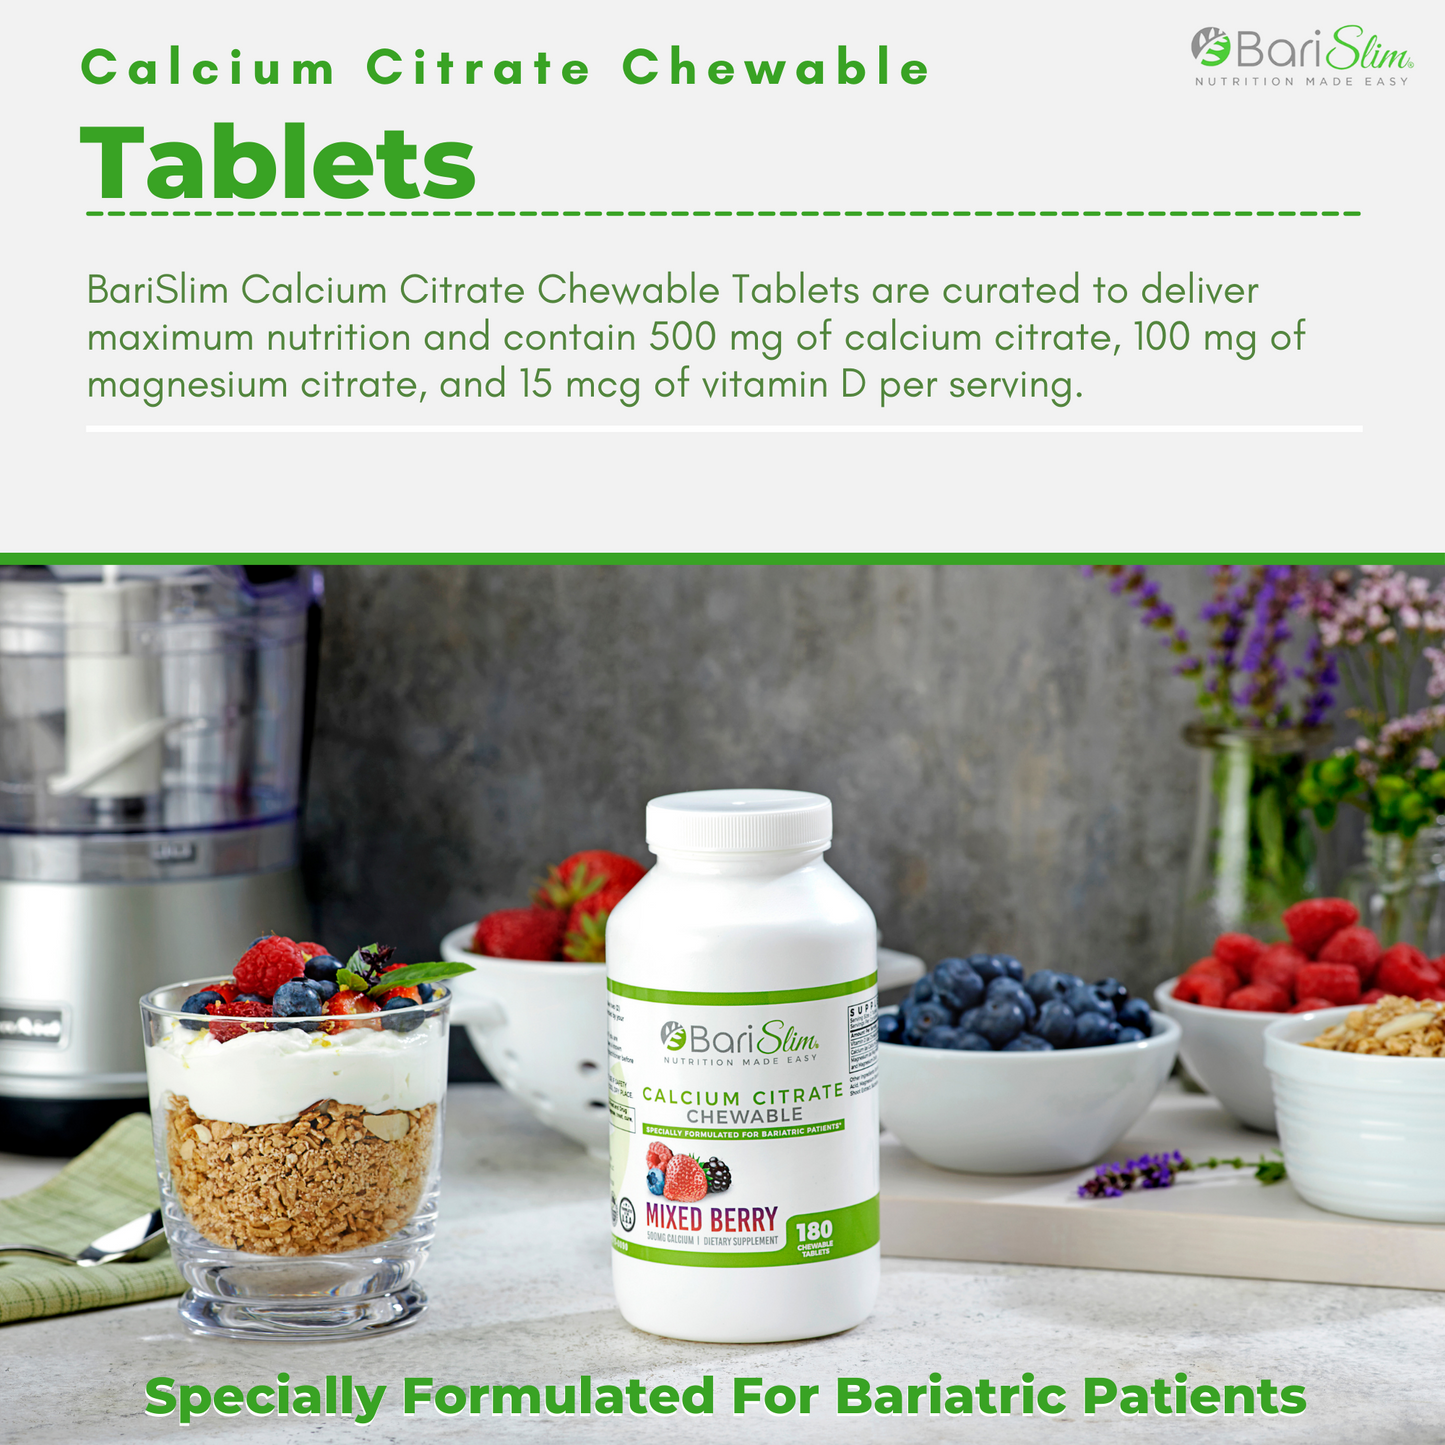 Calcium Citrate Chewable Tablets